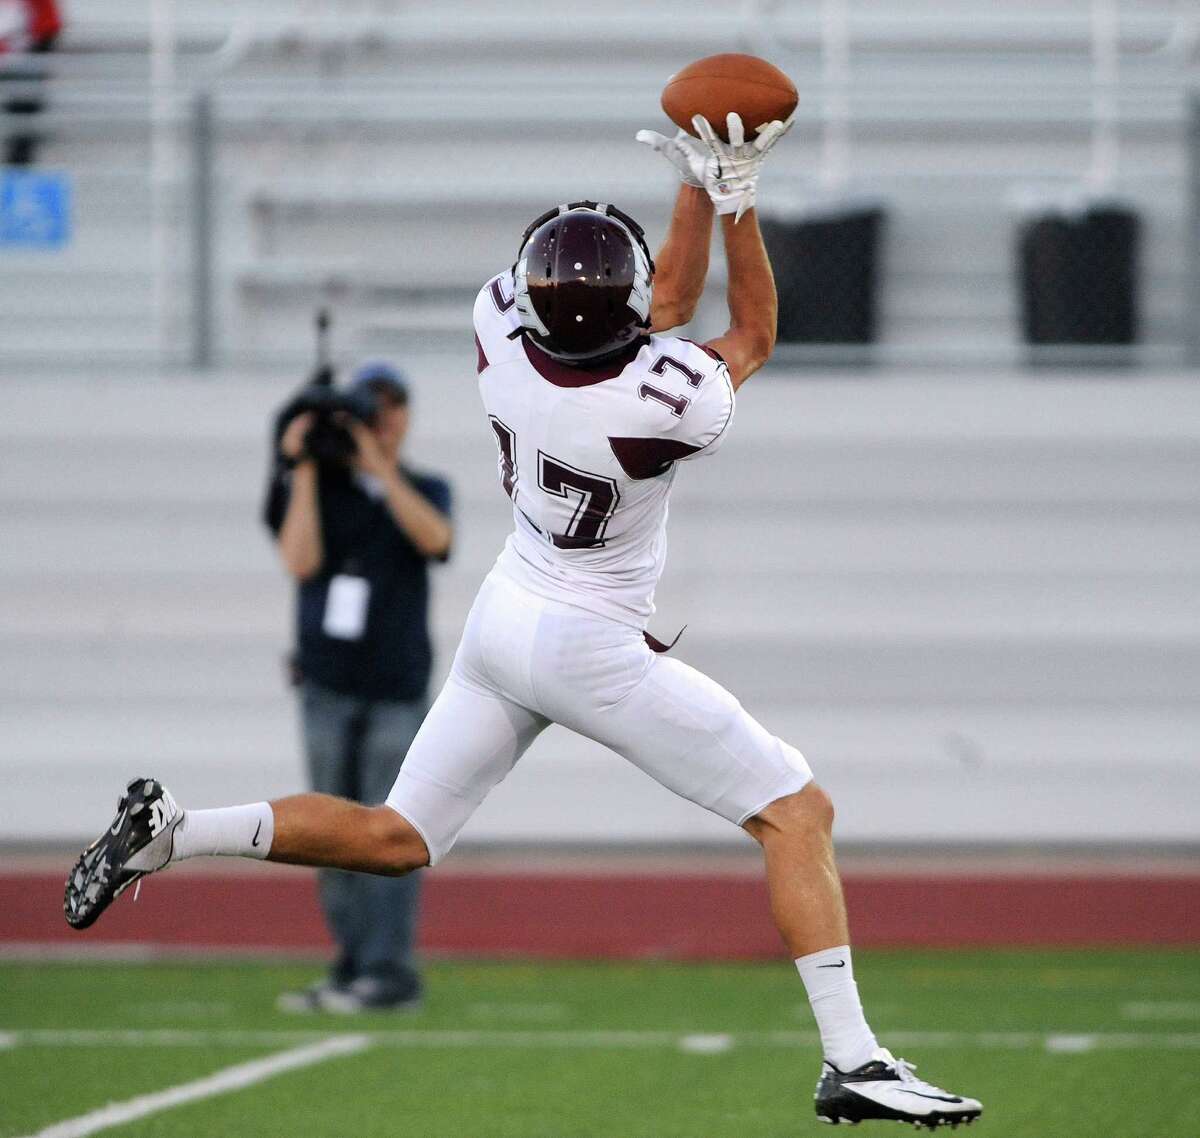 Lance Ratliff of West Texas A&M catches a first-half touchdown pass against Incarnate Word during college football action at Benson Stadium on Saturday, Sept. 22, 2012.